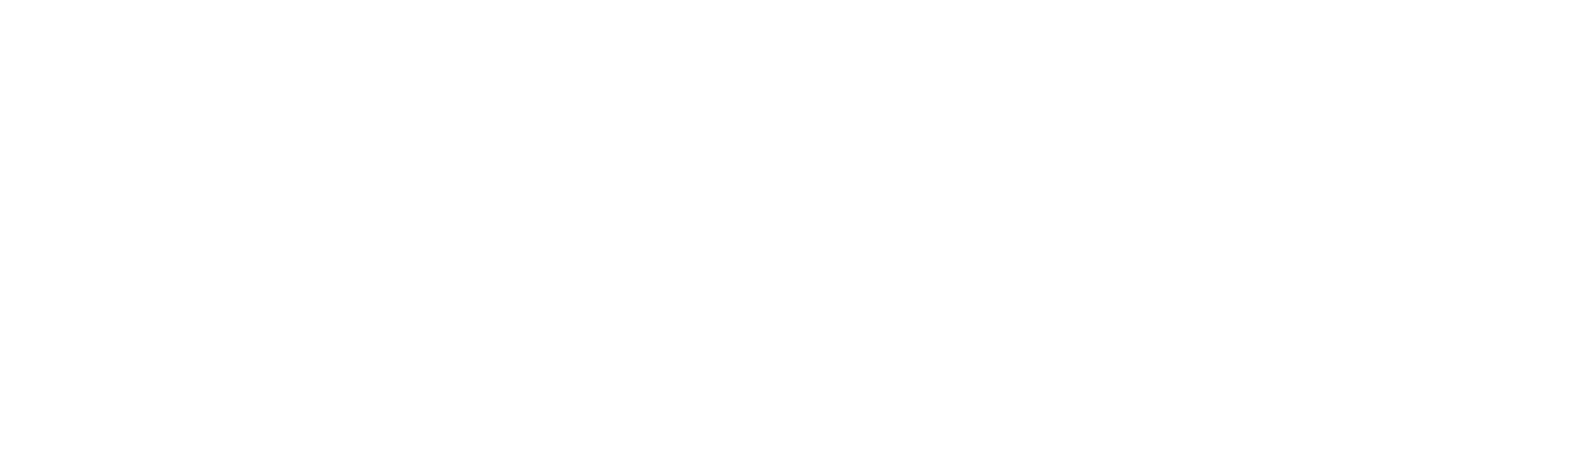 Weight Watchers logo large for dark backgrounds (transparent PNG)